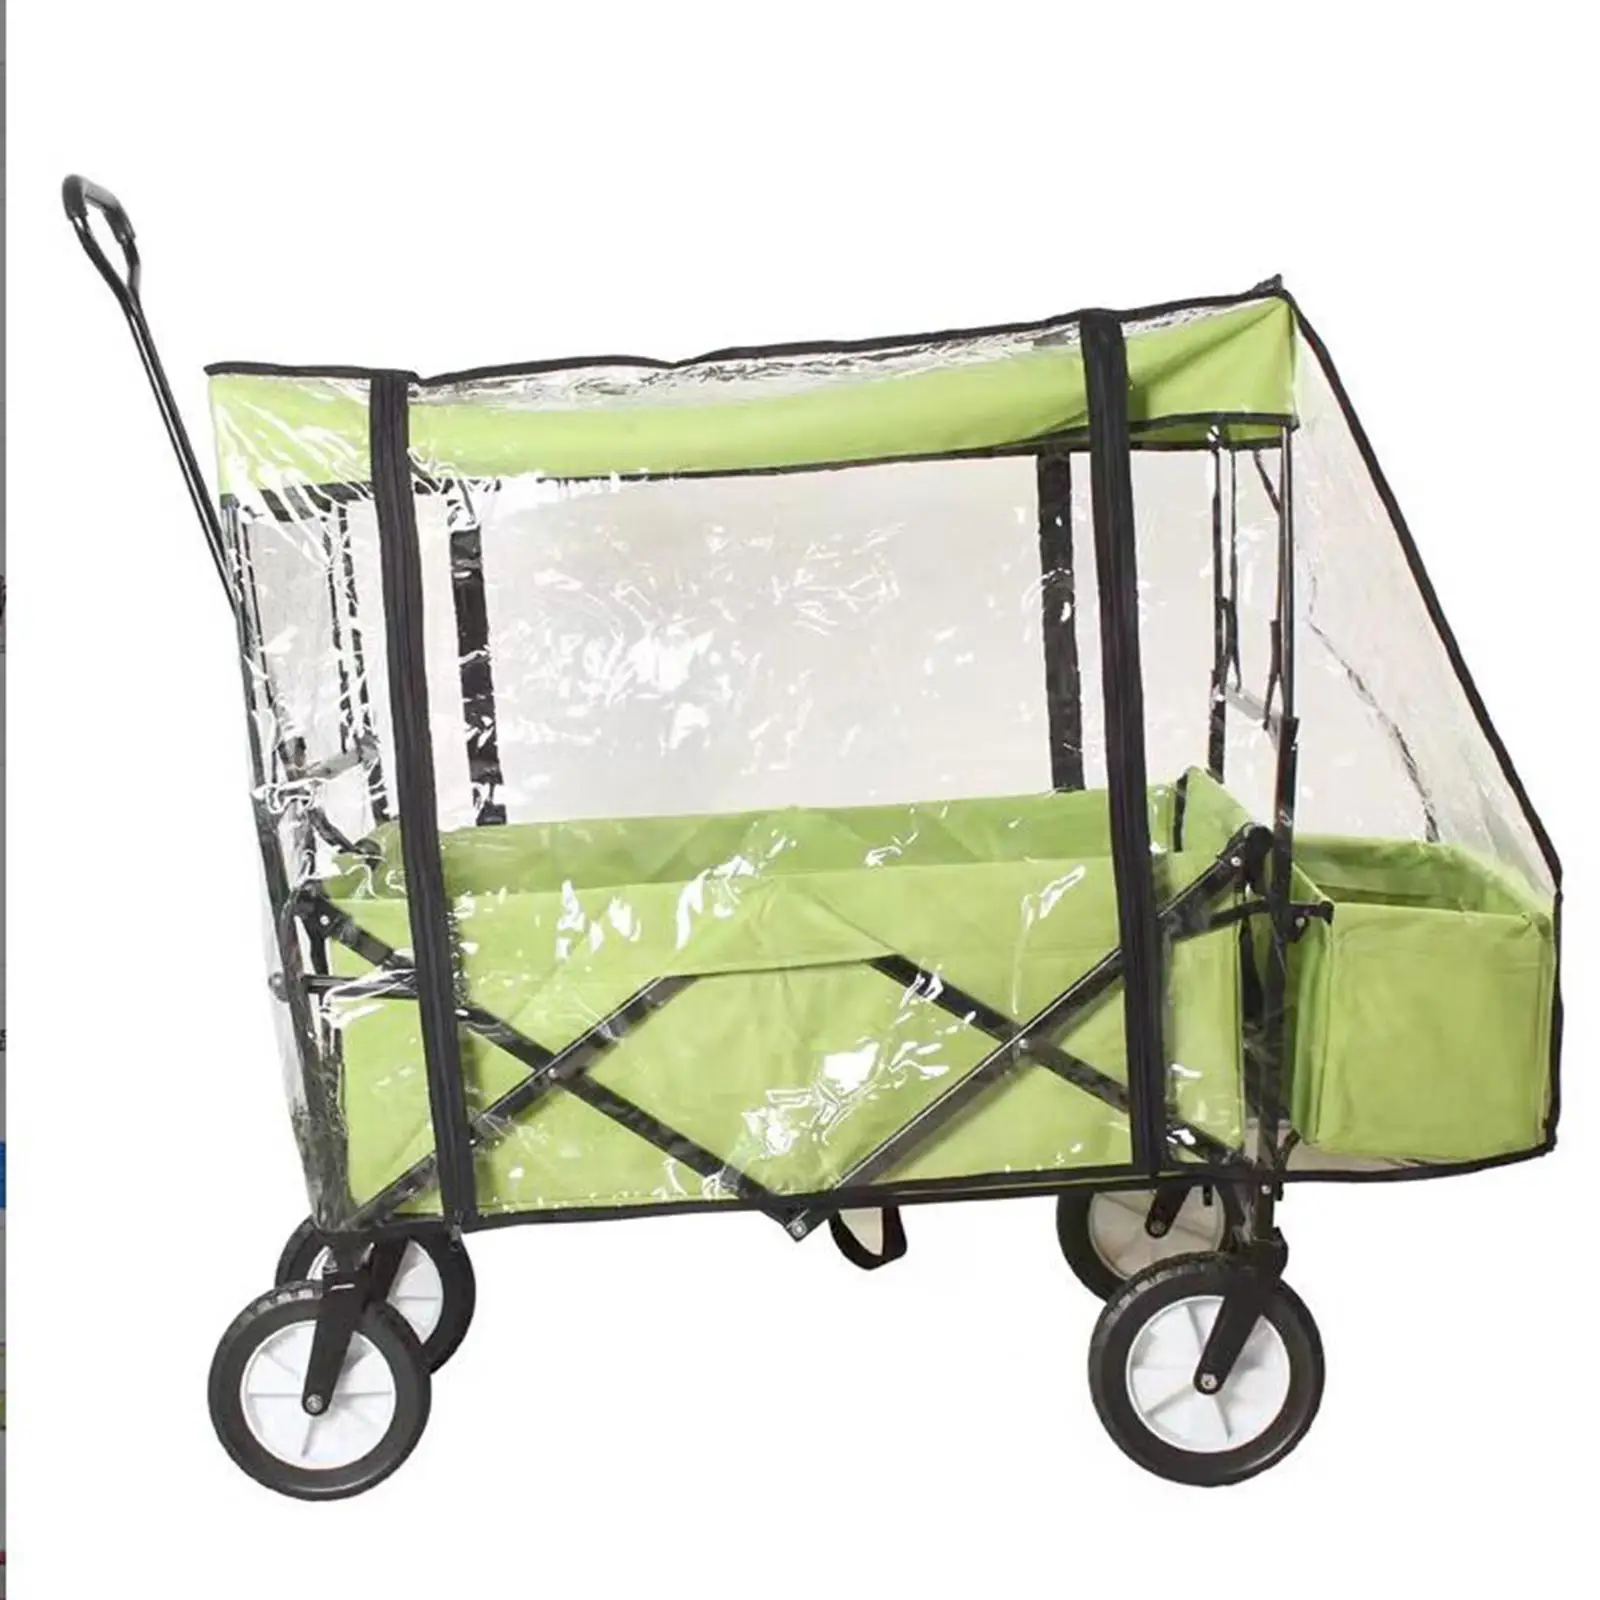 Collapsible Wagon Cart Waterproof Cover Canopy Rainproof Sturdy PVC Material Portable Windproof for Outdoor Camping Picnic